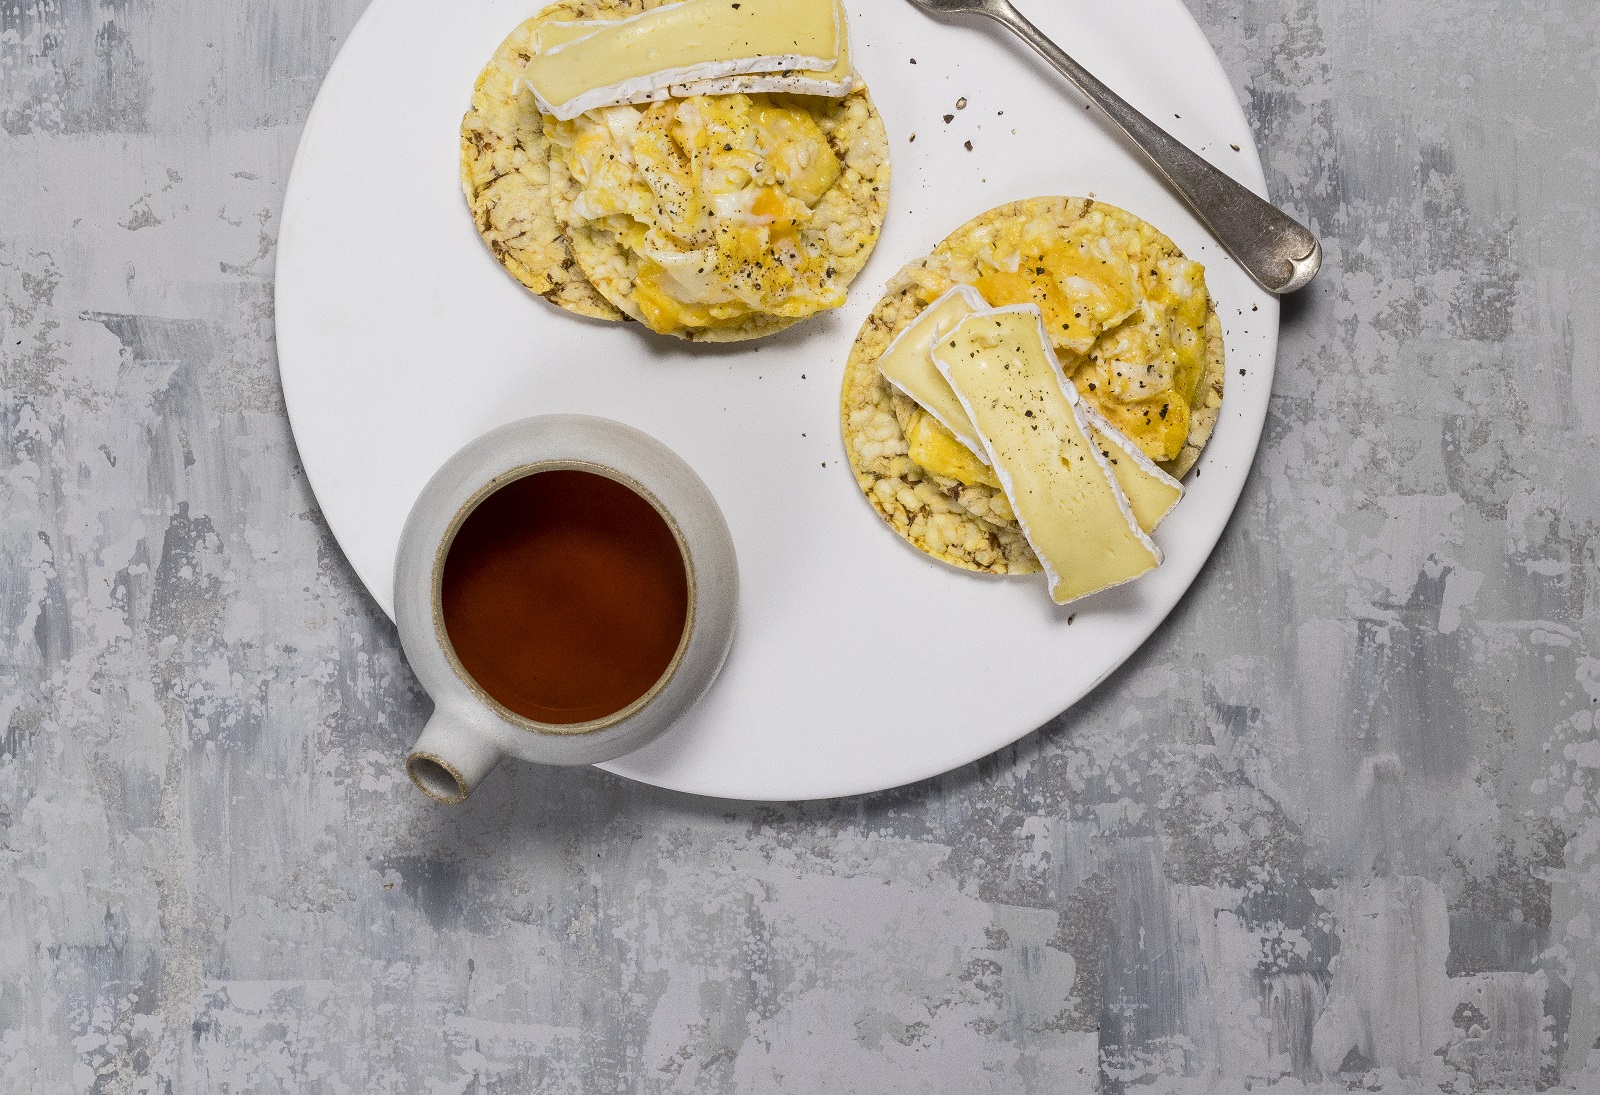 Scrambled Egg & brie on CORN THINS slices